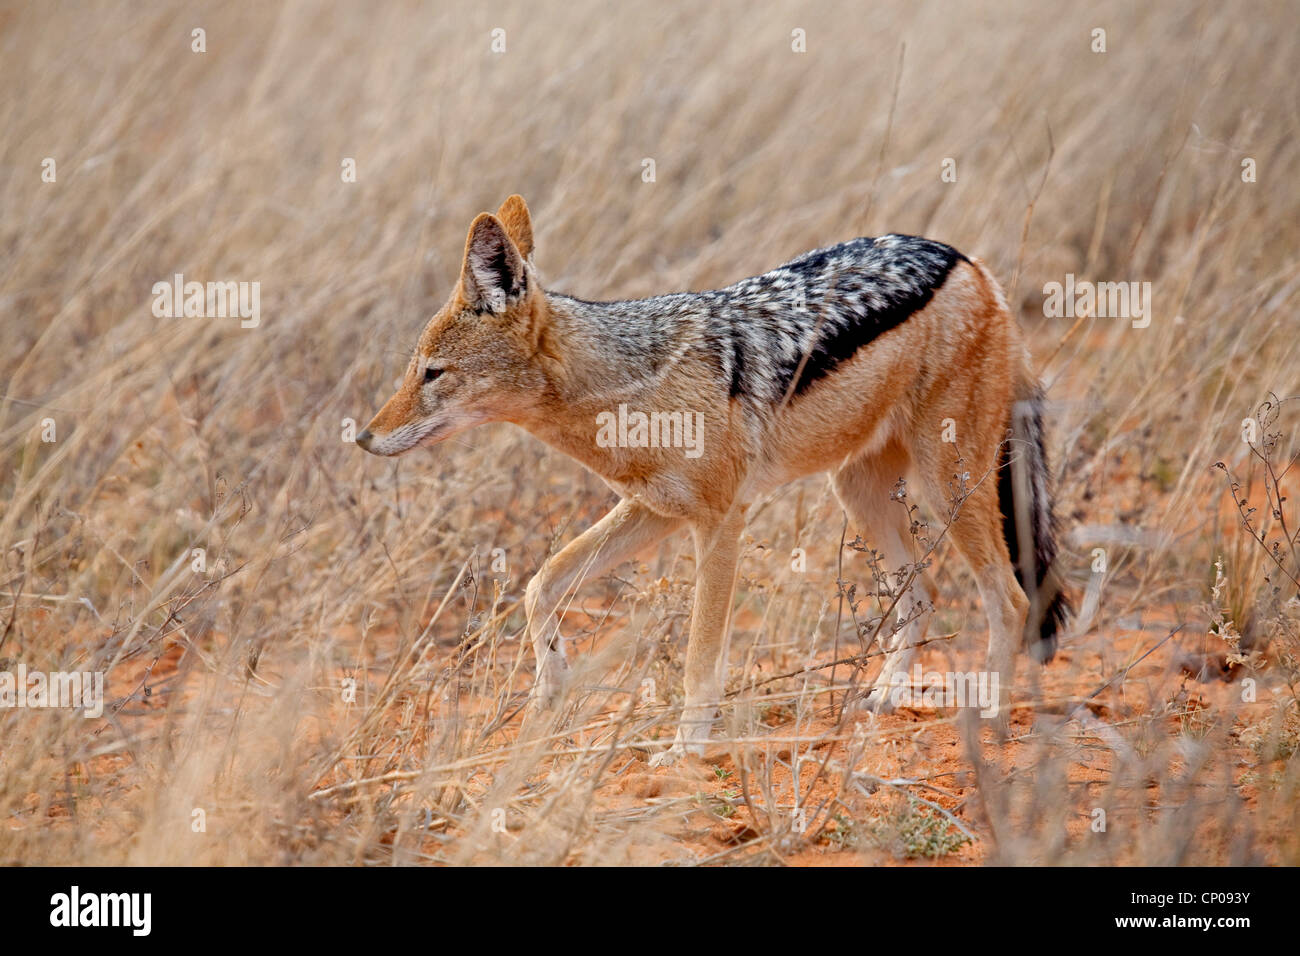 black-backed jackal (Canis mesomelas), in savannah, South Africa, Northern Cape, Kgalagadi Transfrontier National Park Stock Photo